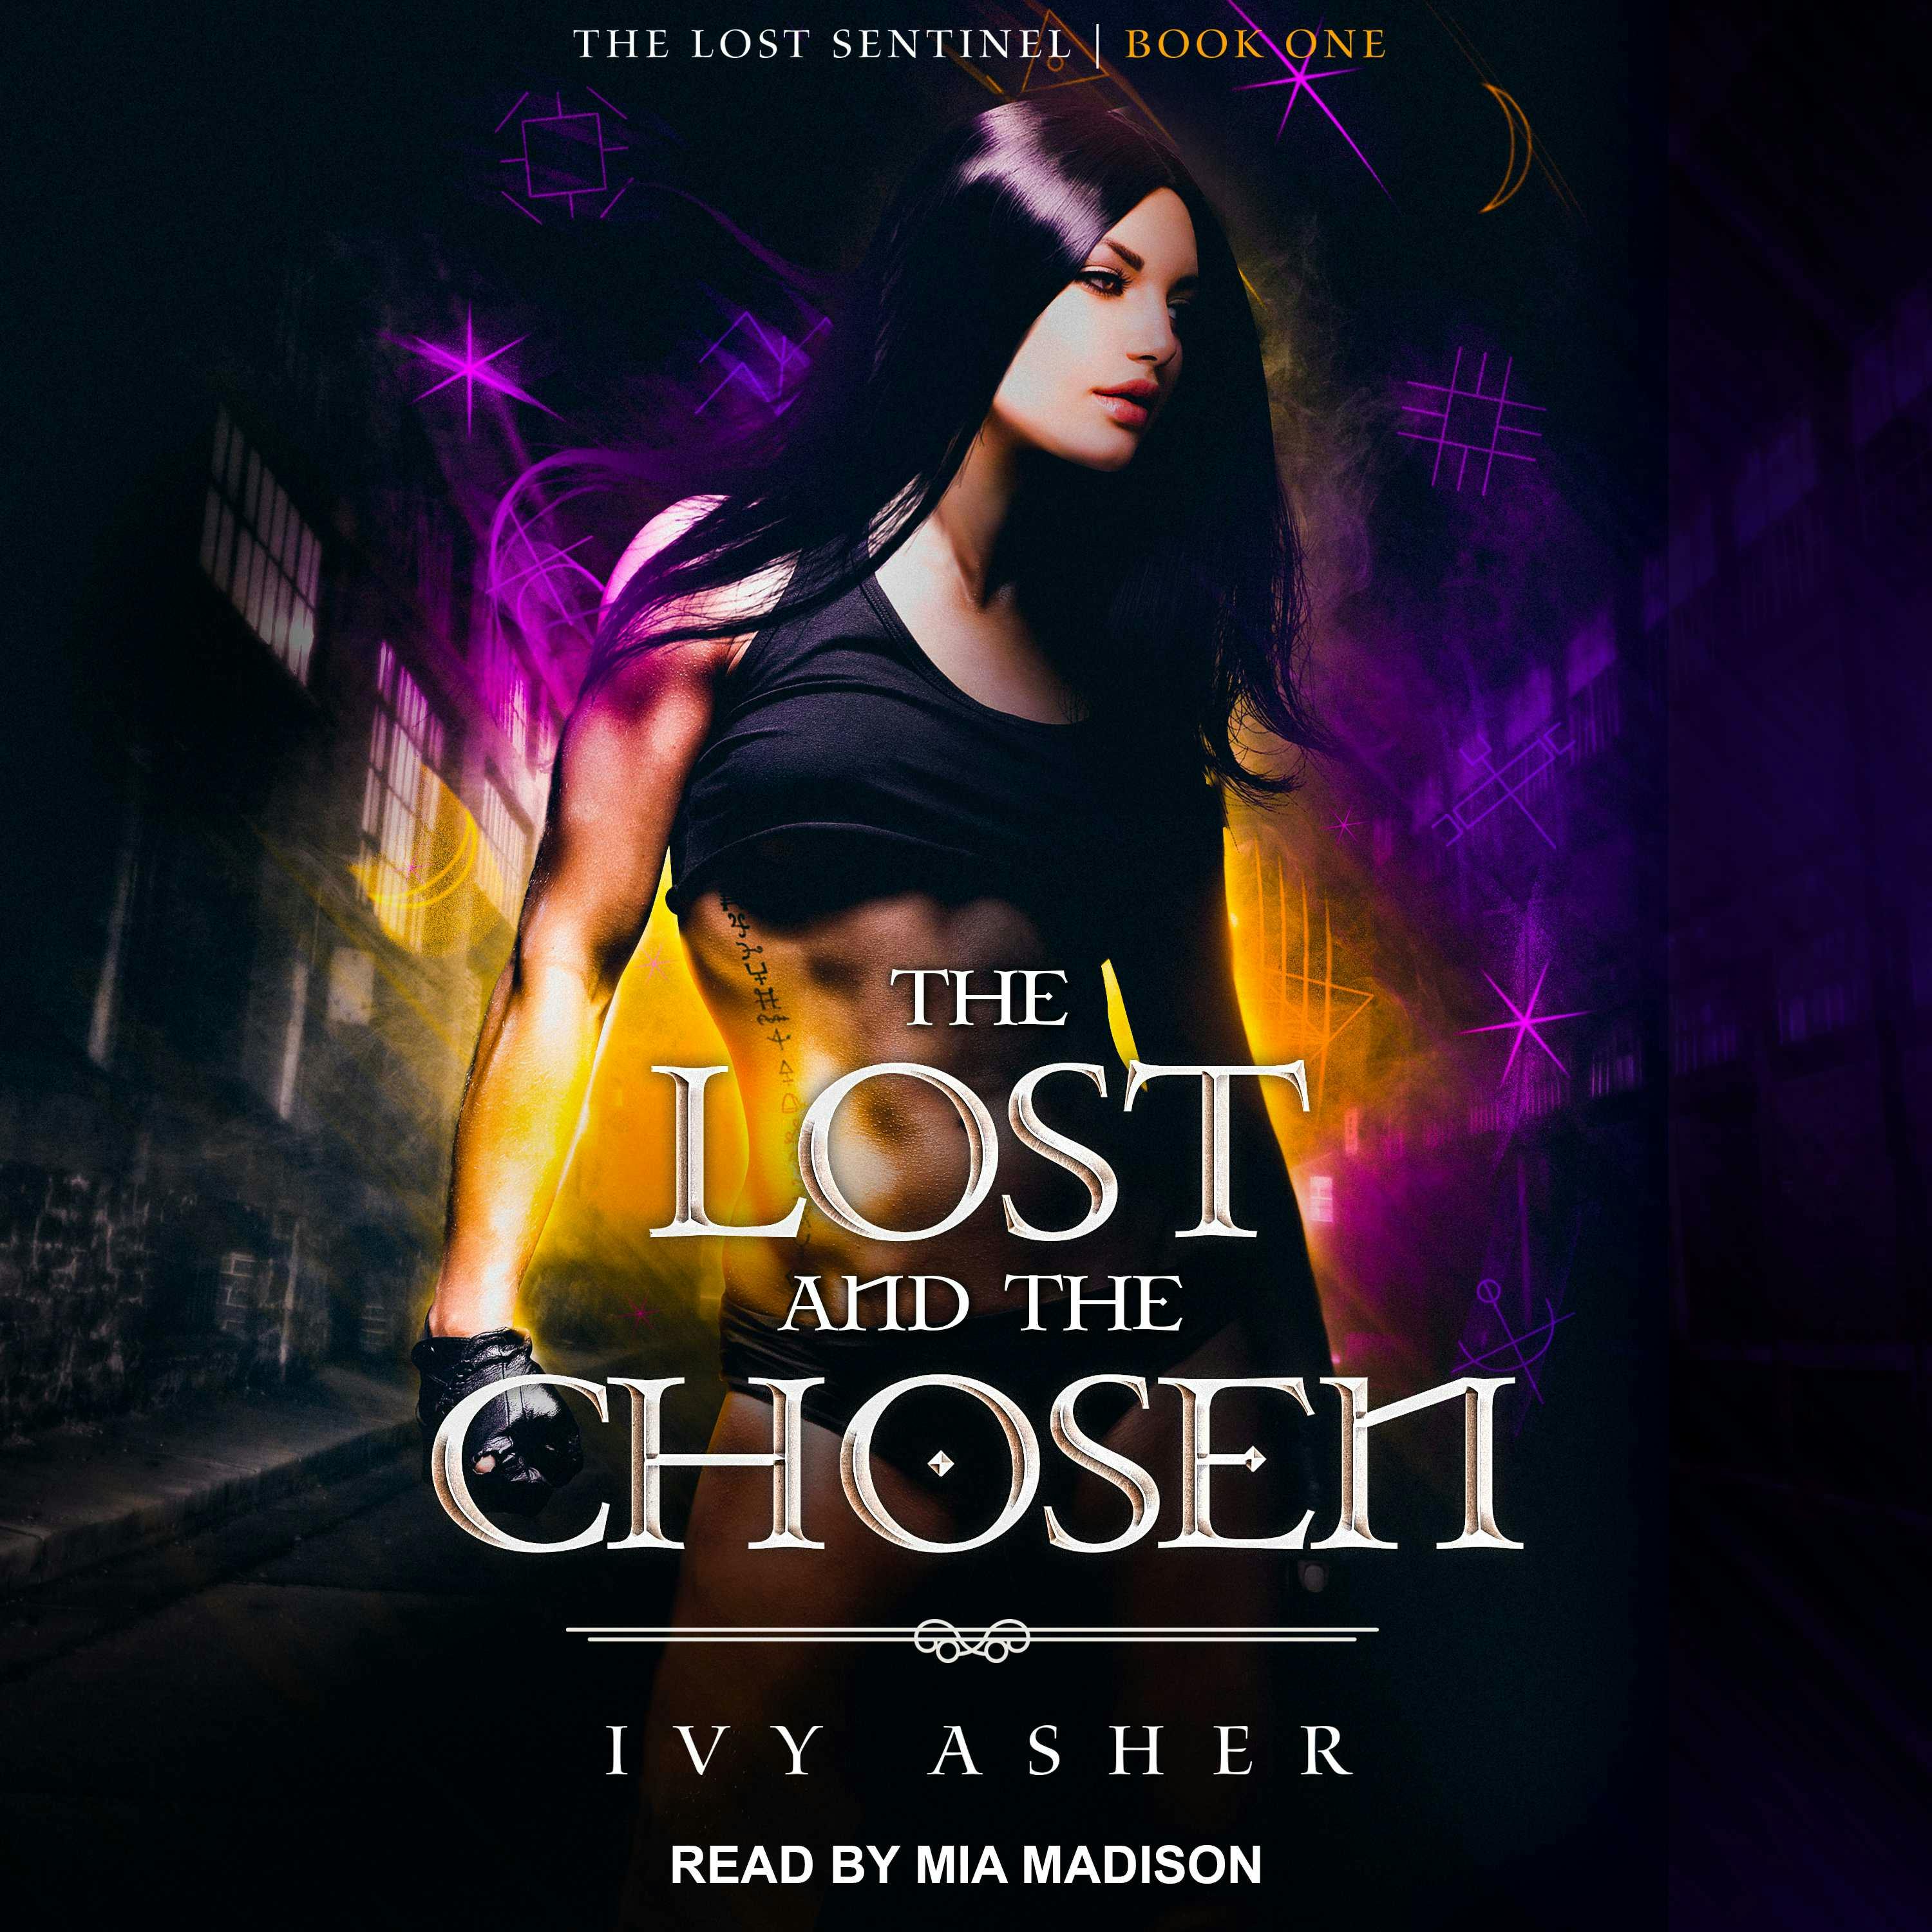 The Lost and the Chosen - undefined